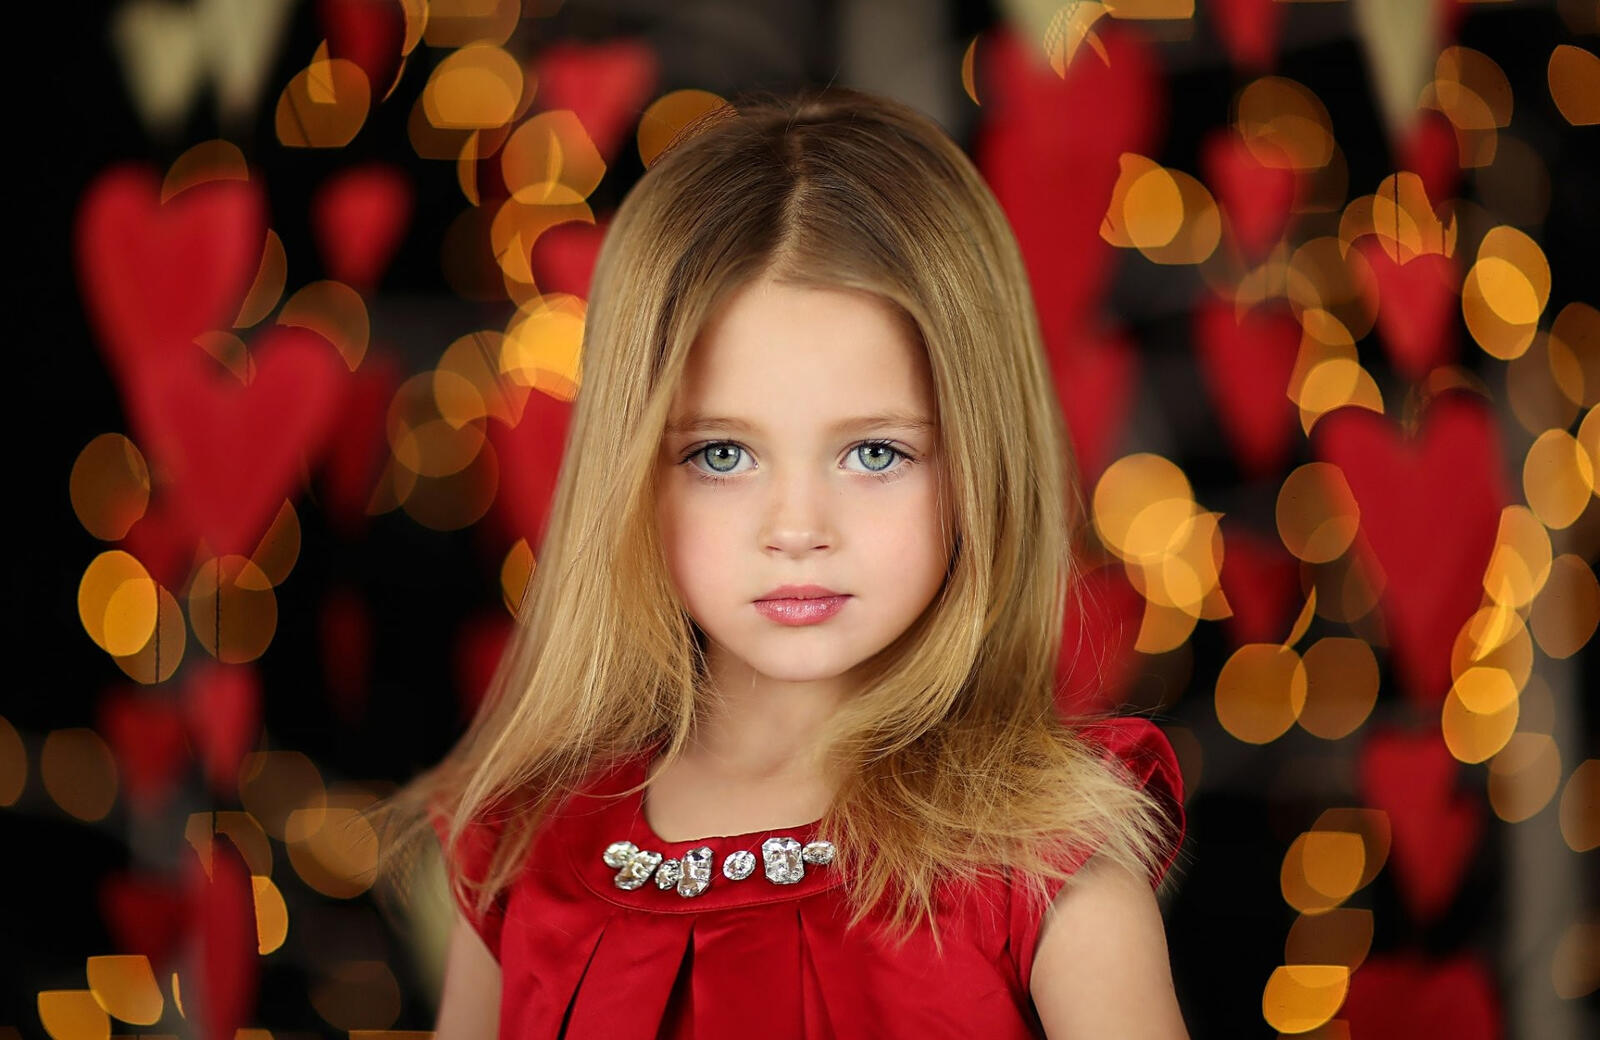 Free photo Cute little girl with blond hair